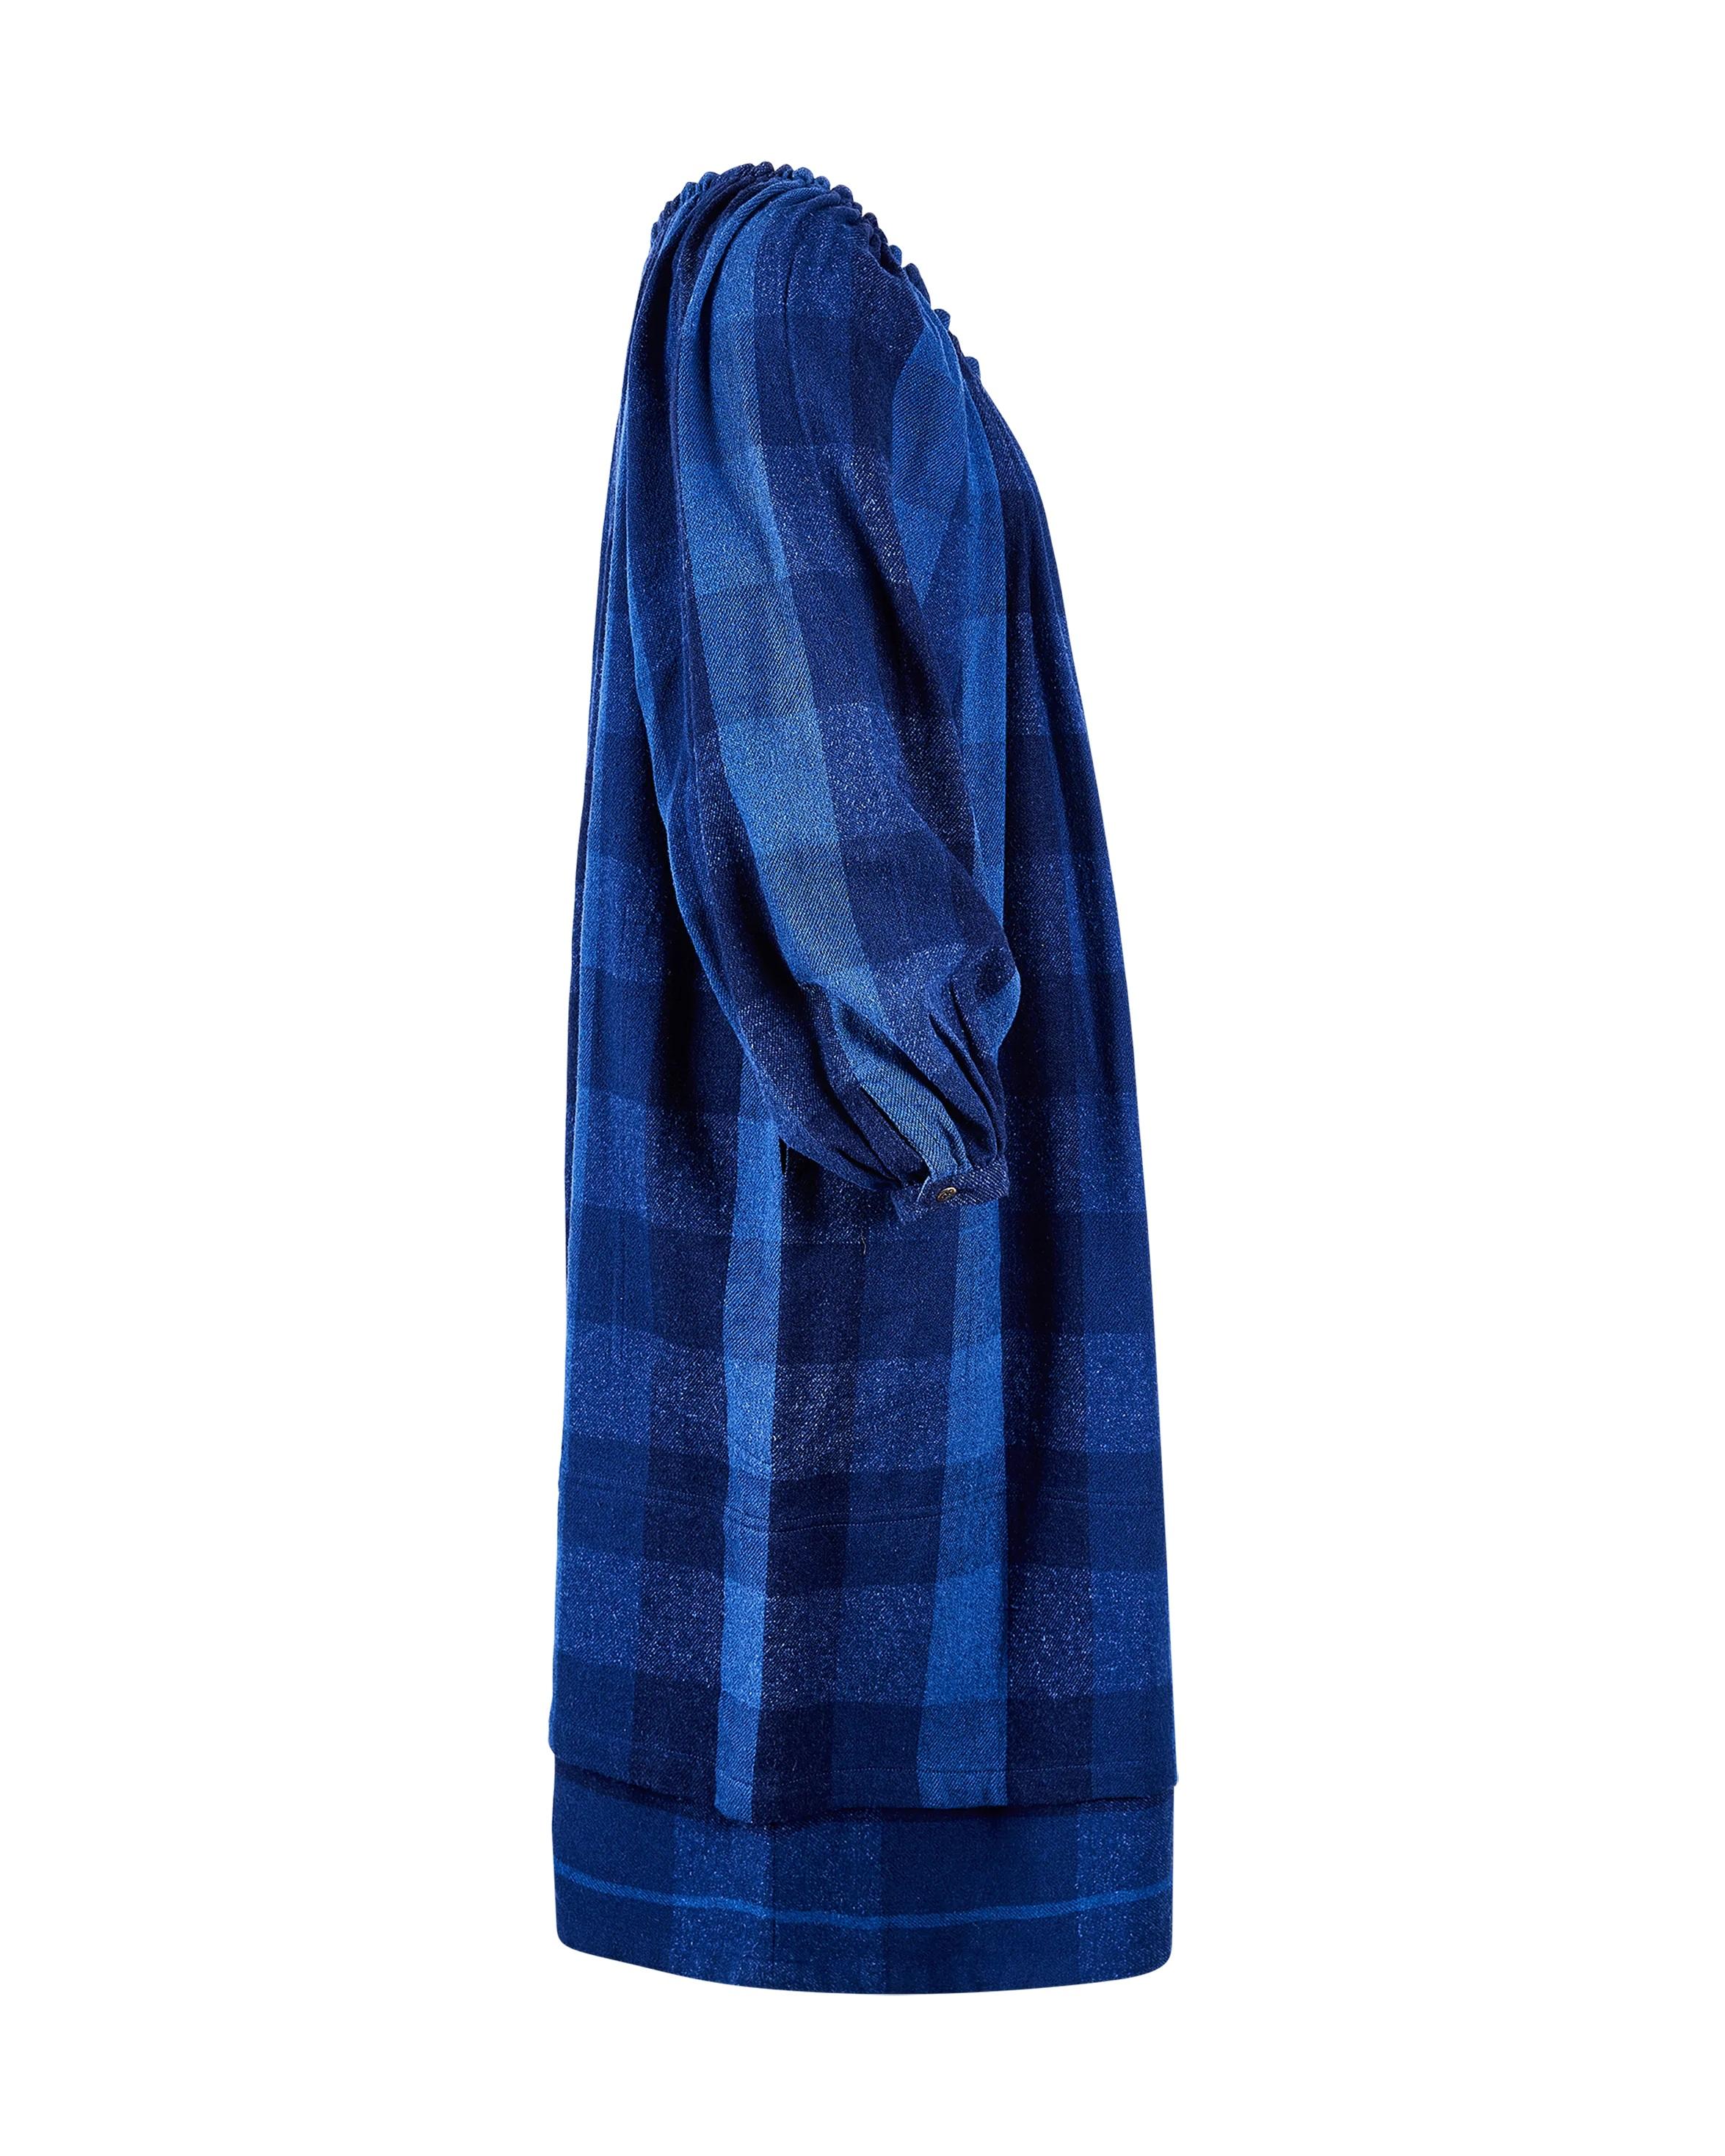 1990's Issey Miyake 'Sport' tartan print blue dress. Long sleeve midi dress with deep blue and black tartan pattern throughout. Features functional front pockets and gathered neckline. Single button closure at wrists and side slit pockets, with